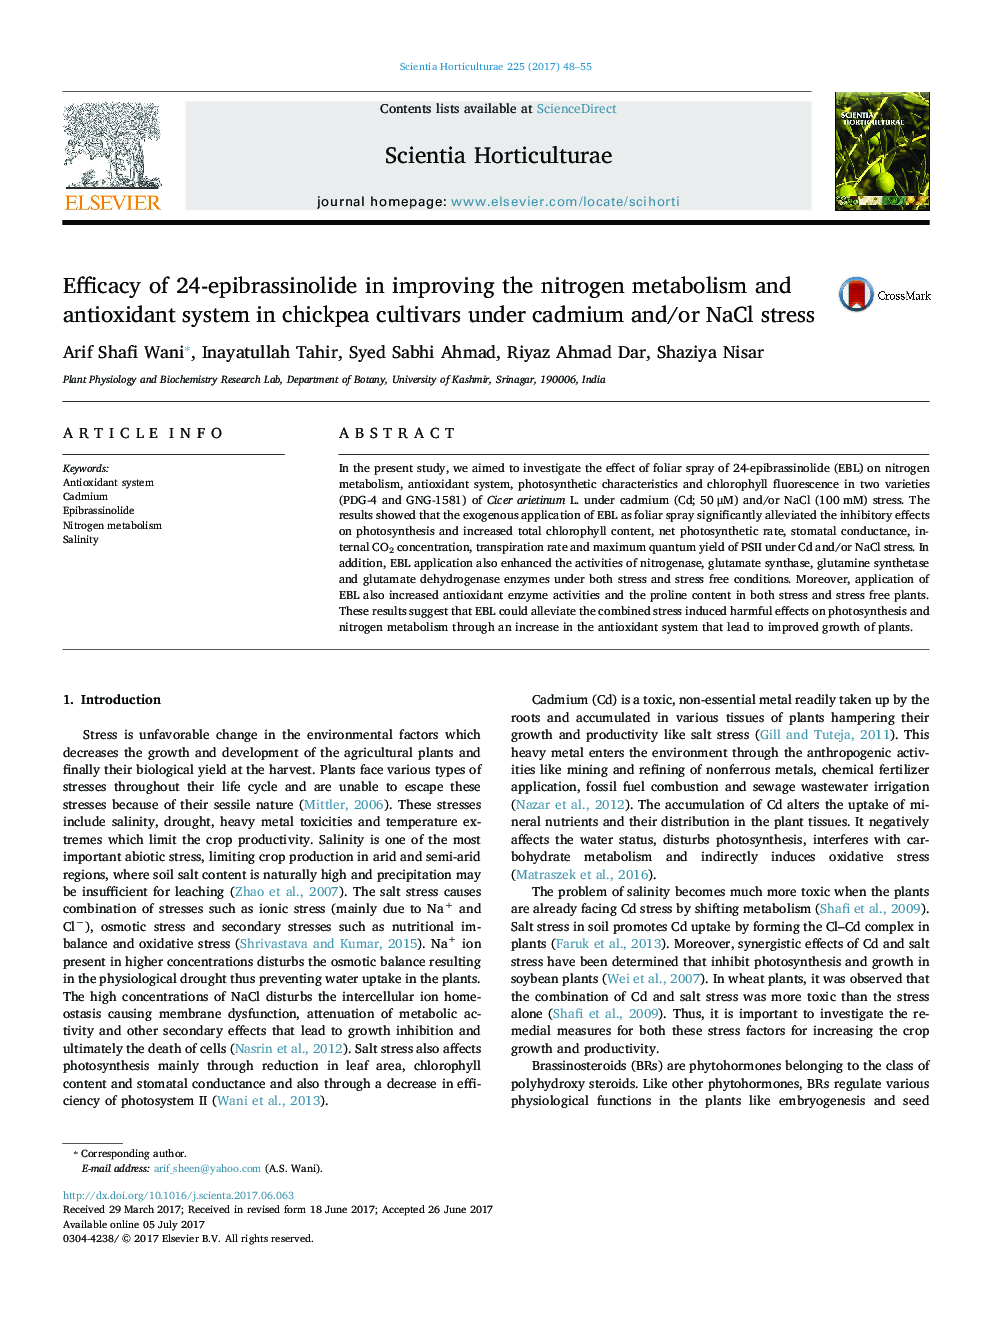 Efficacy of 24-epibrassinolide in improving the nitrogen metabolism and antioxidant system in chickpea cultivars under cadmium and/or NaCl stress